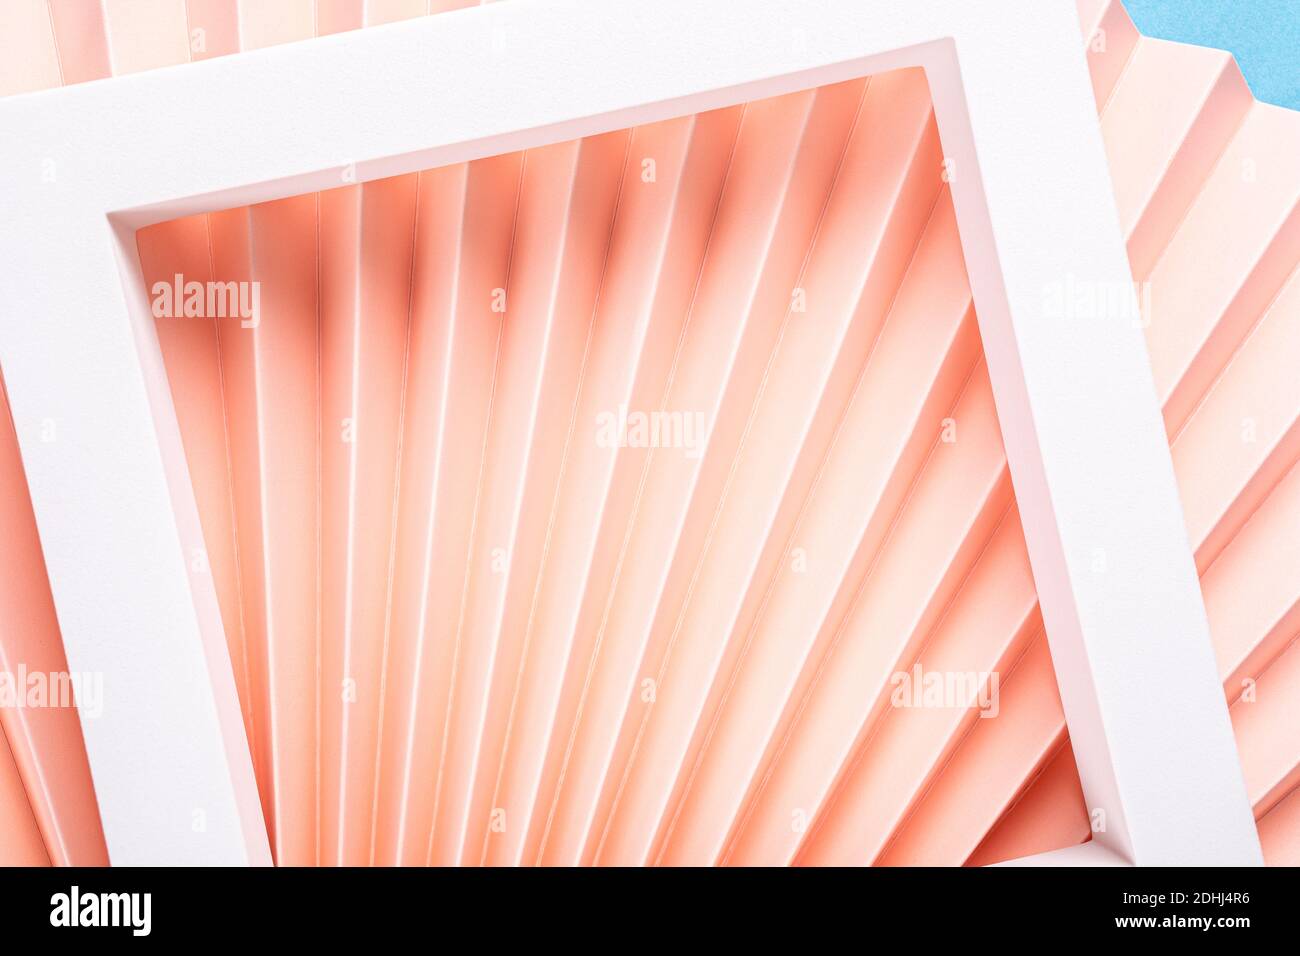 Colorful abstract background with paper fans Stock Photo